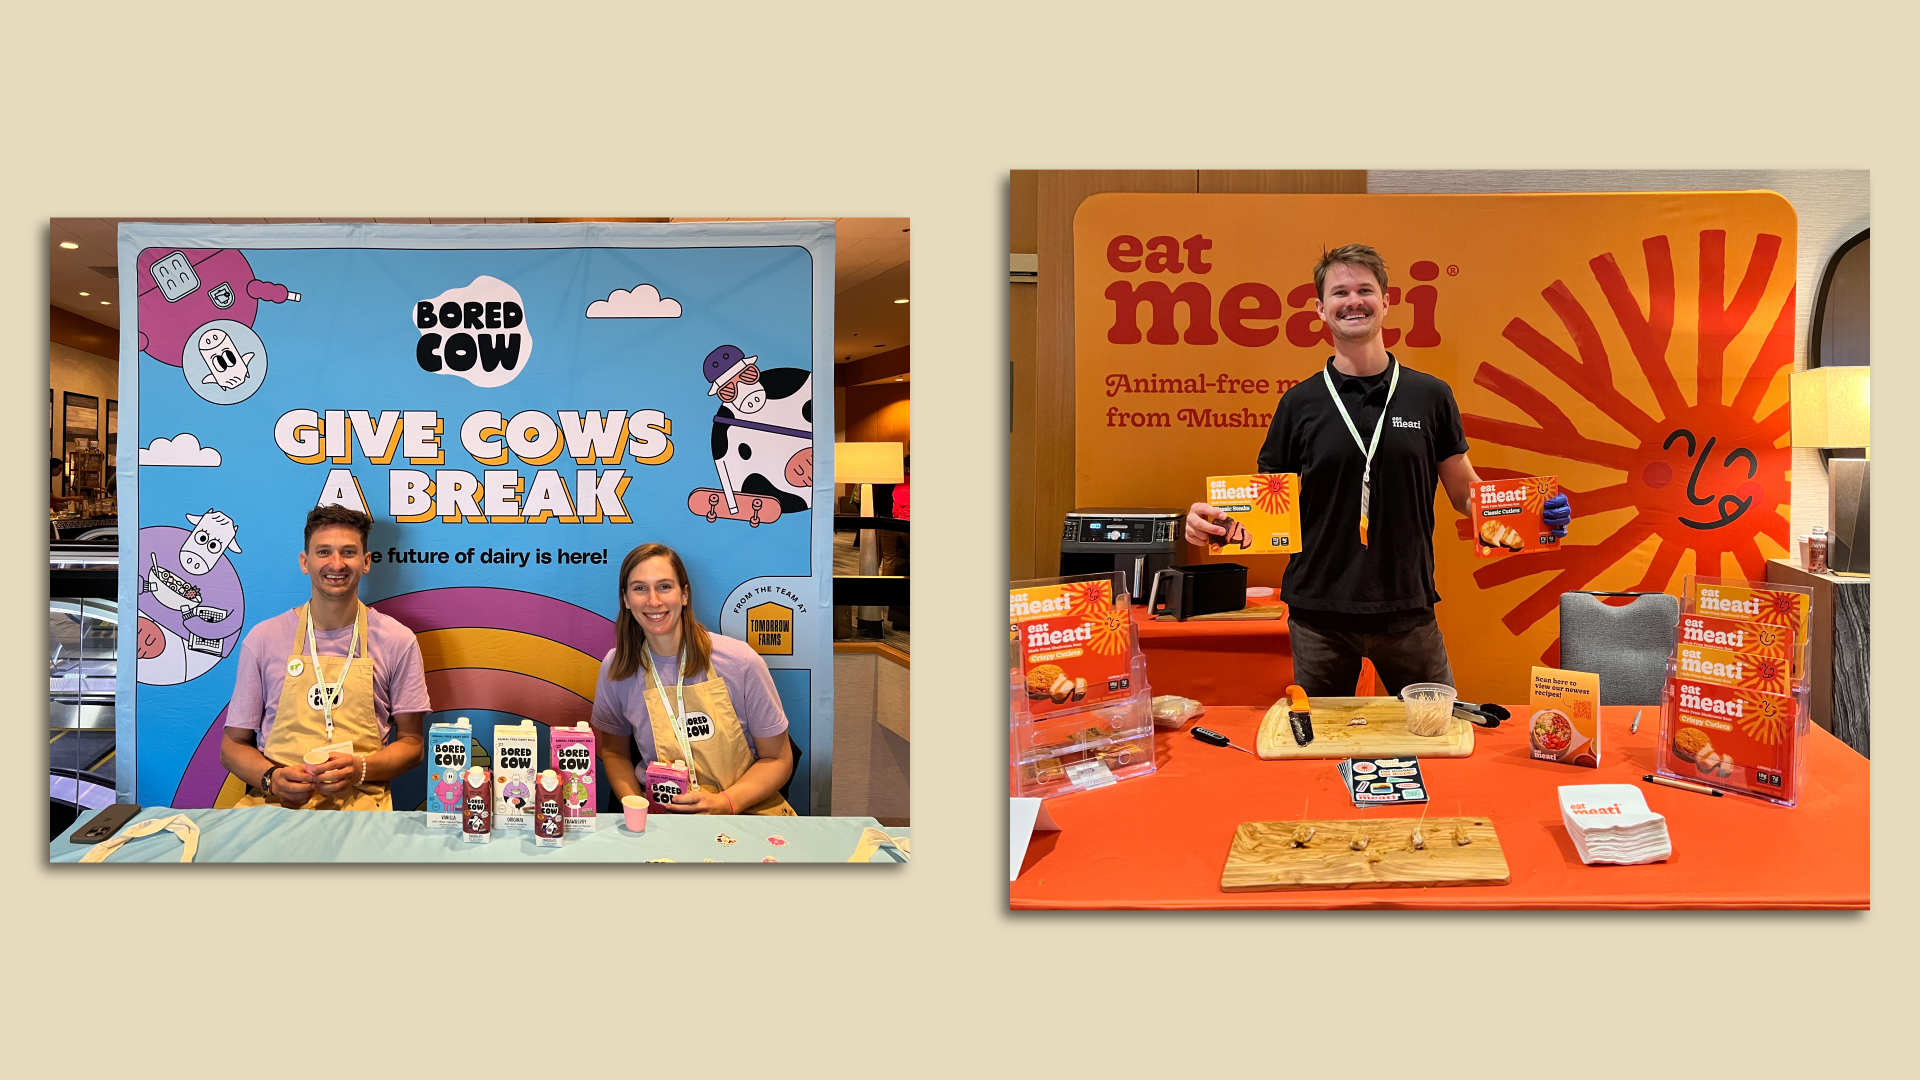 Trade show booths from food companies Bored Cow (left) and Meati (right).